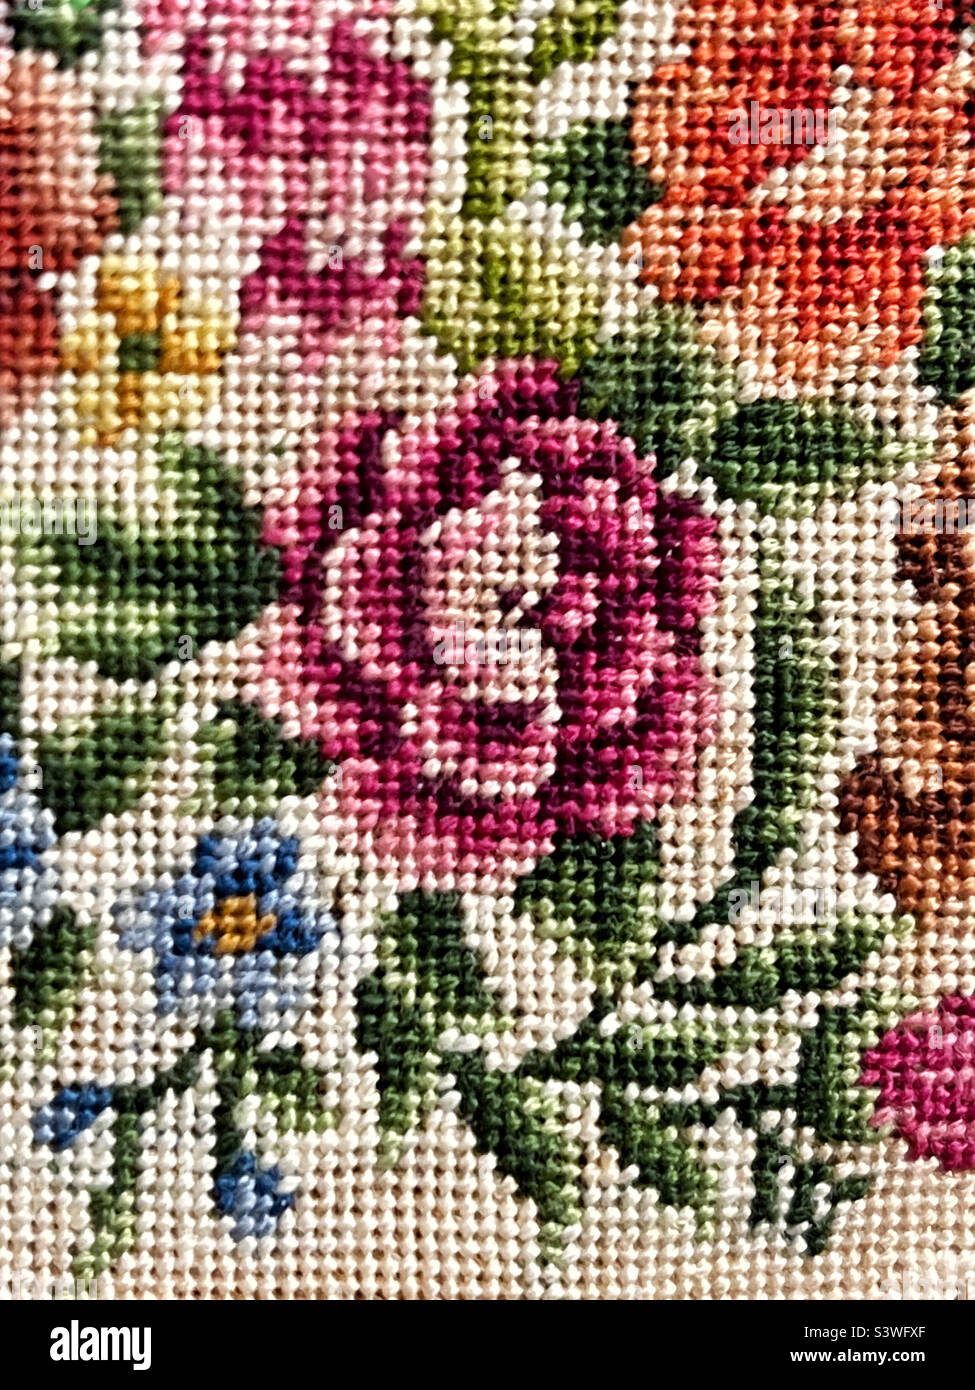 Detail of vintage floral cross stitch embroidery Stock Photo